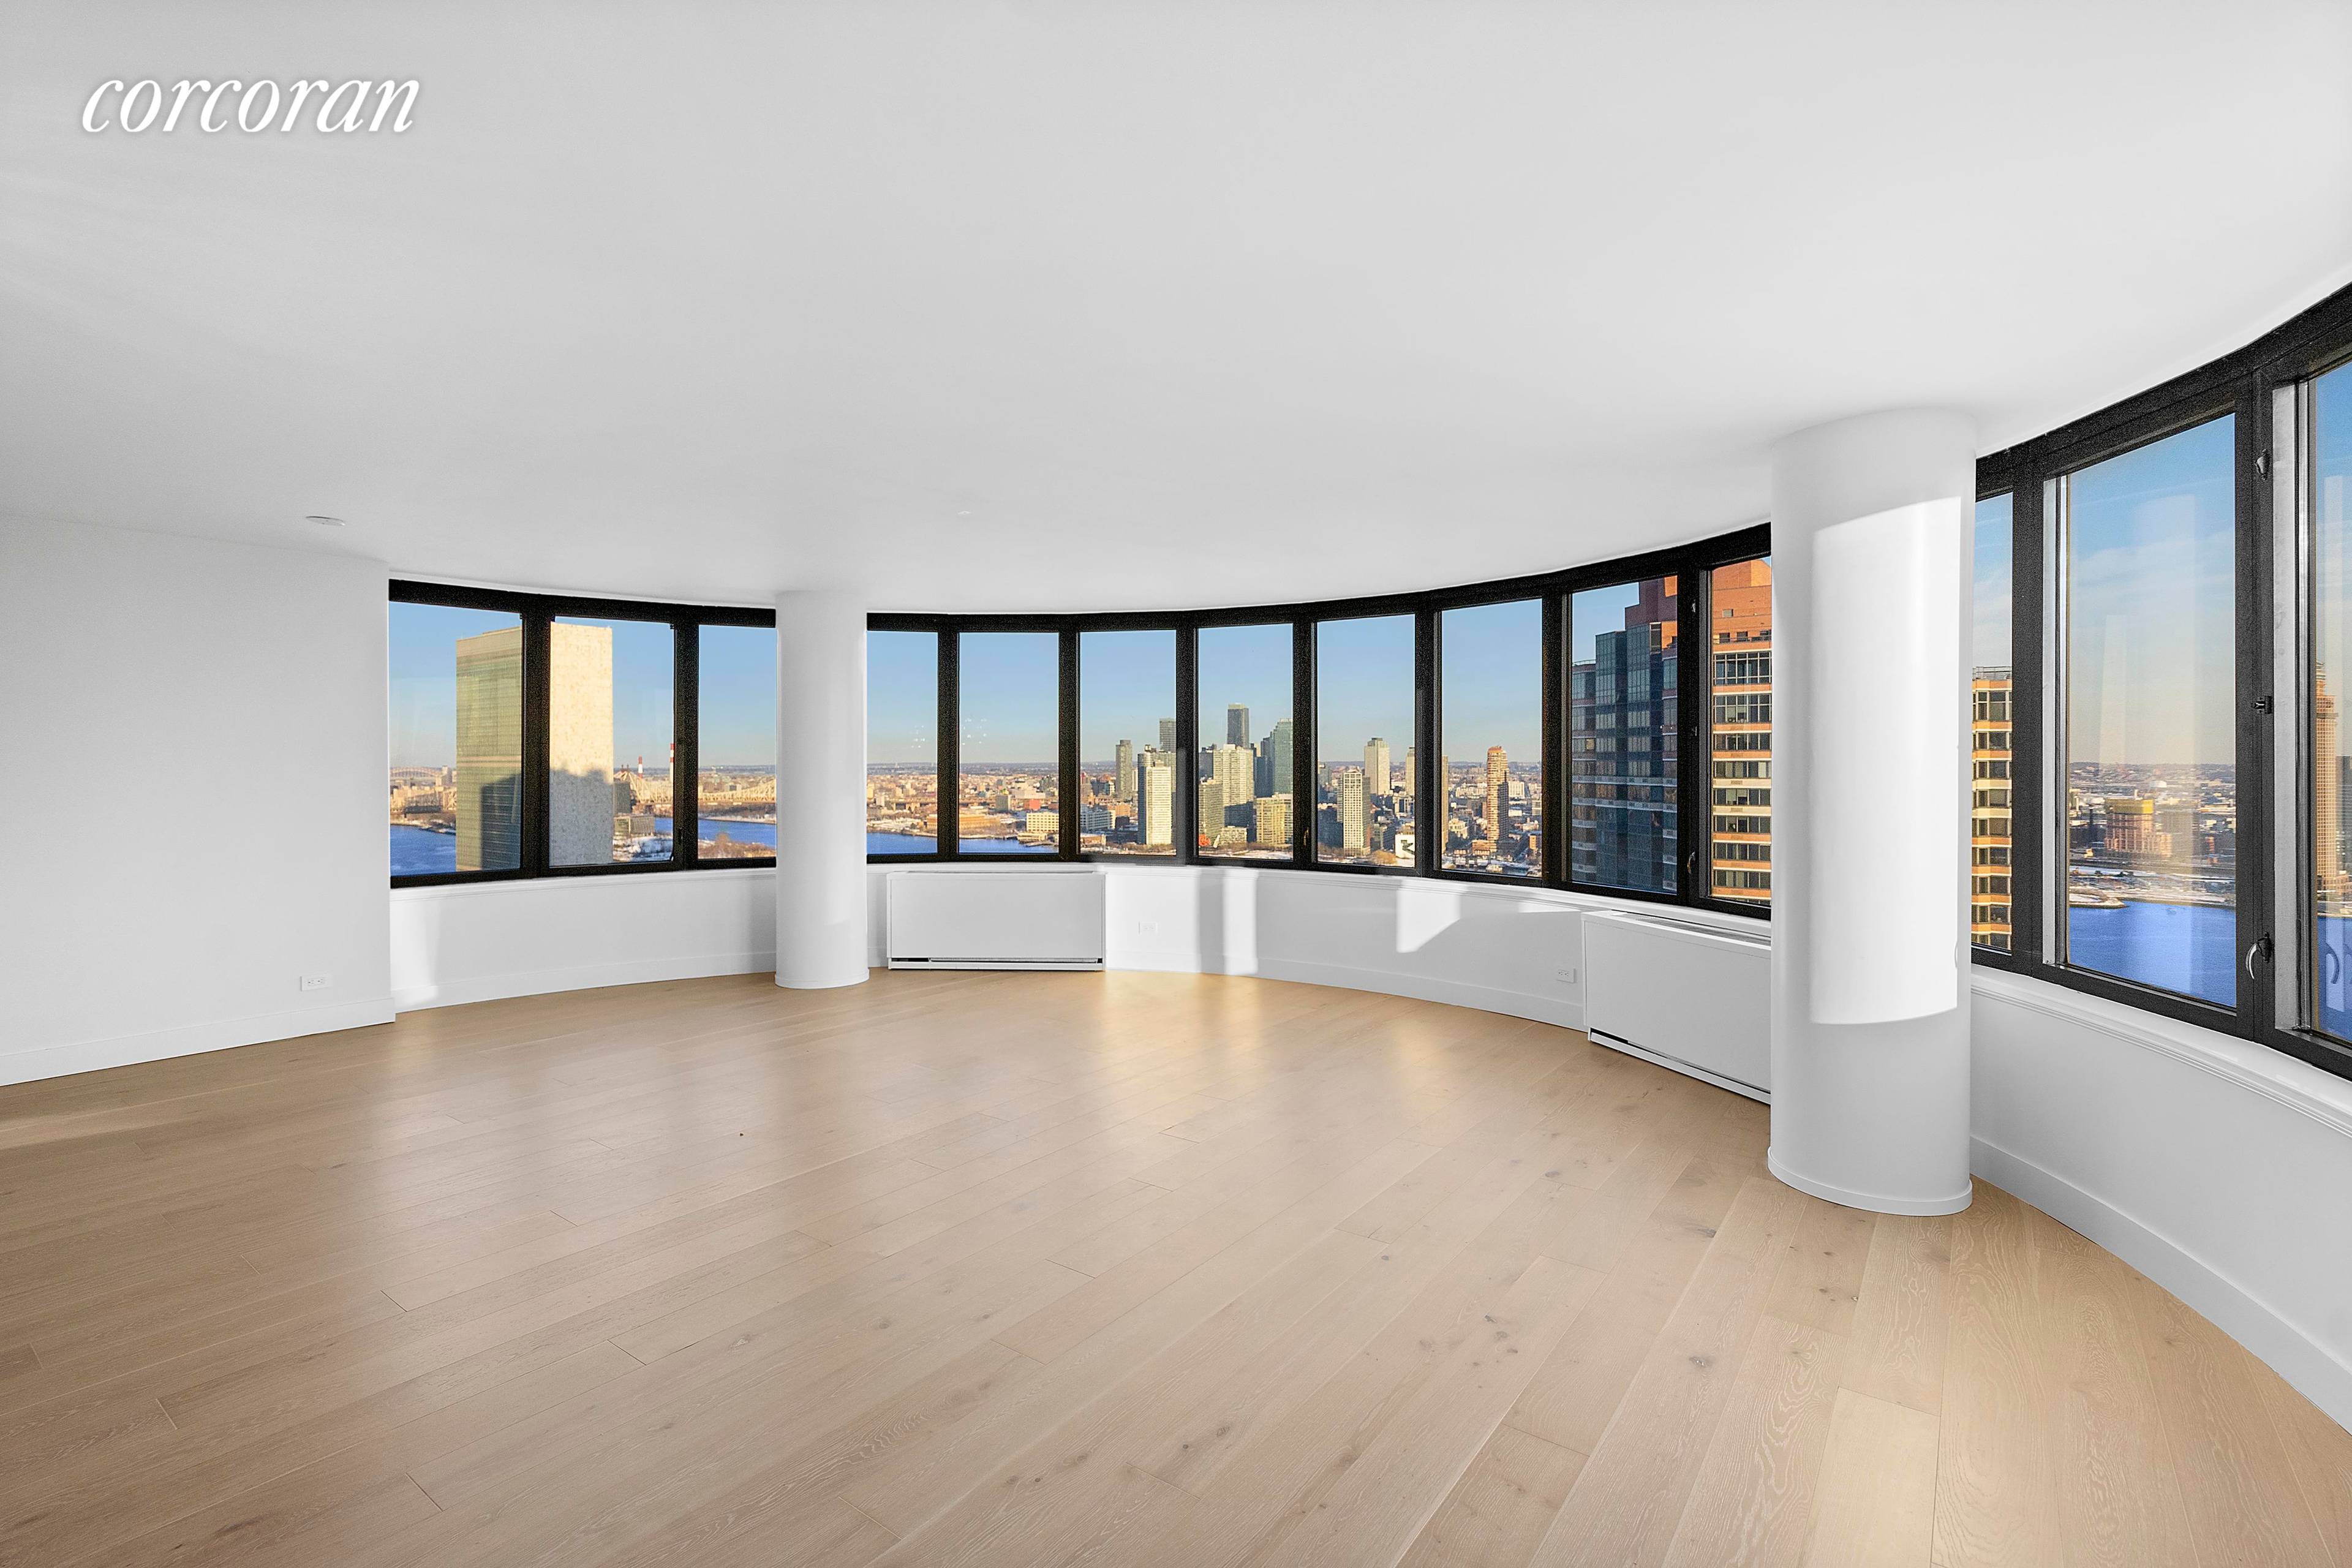 Corinthian Condo 330 E 38thn St Apt 41N New York, NY 10016 Spectacular Panoramic Views of Manhattan skyline and East River 3 bedroom show place renovated to perfection with no ...